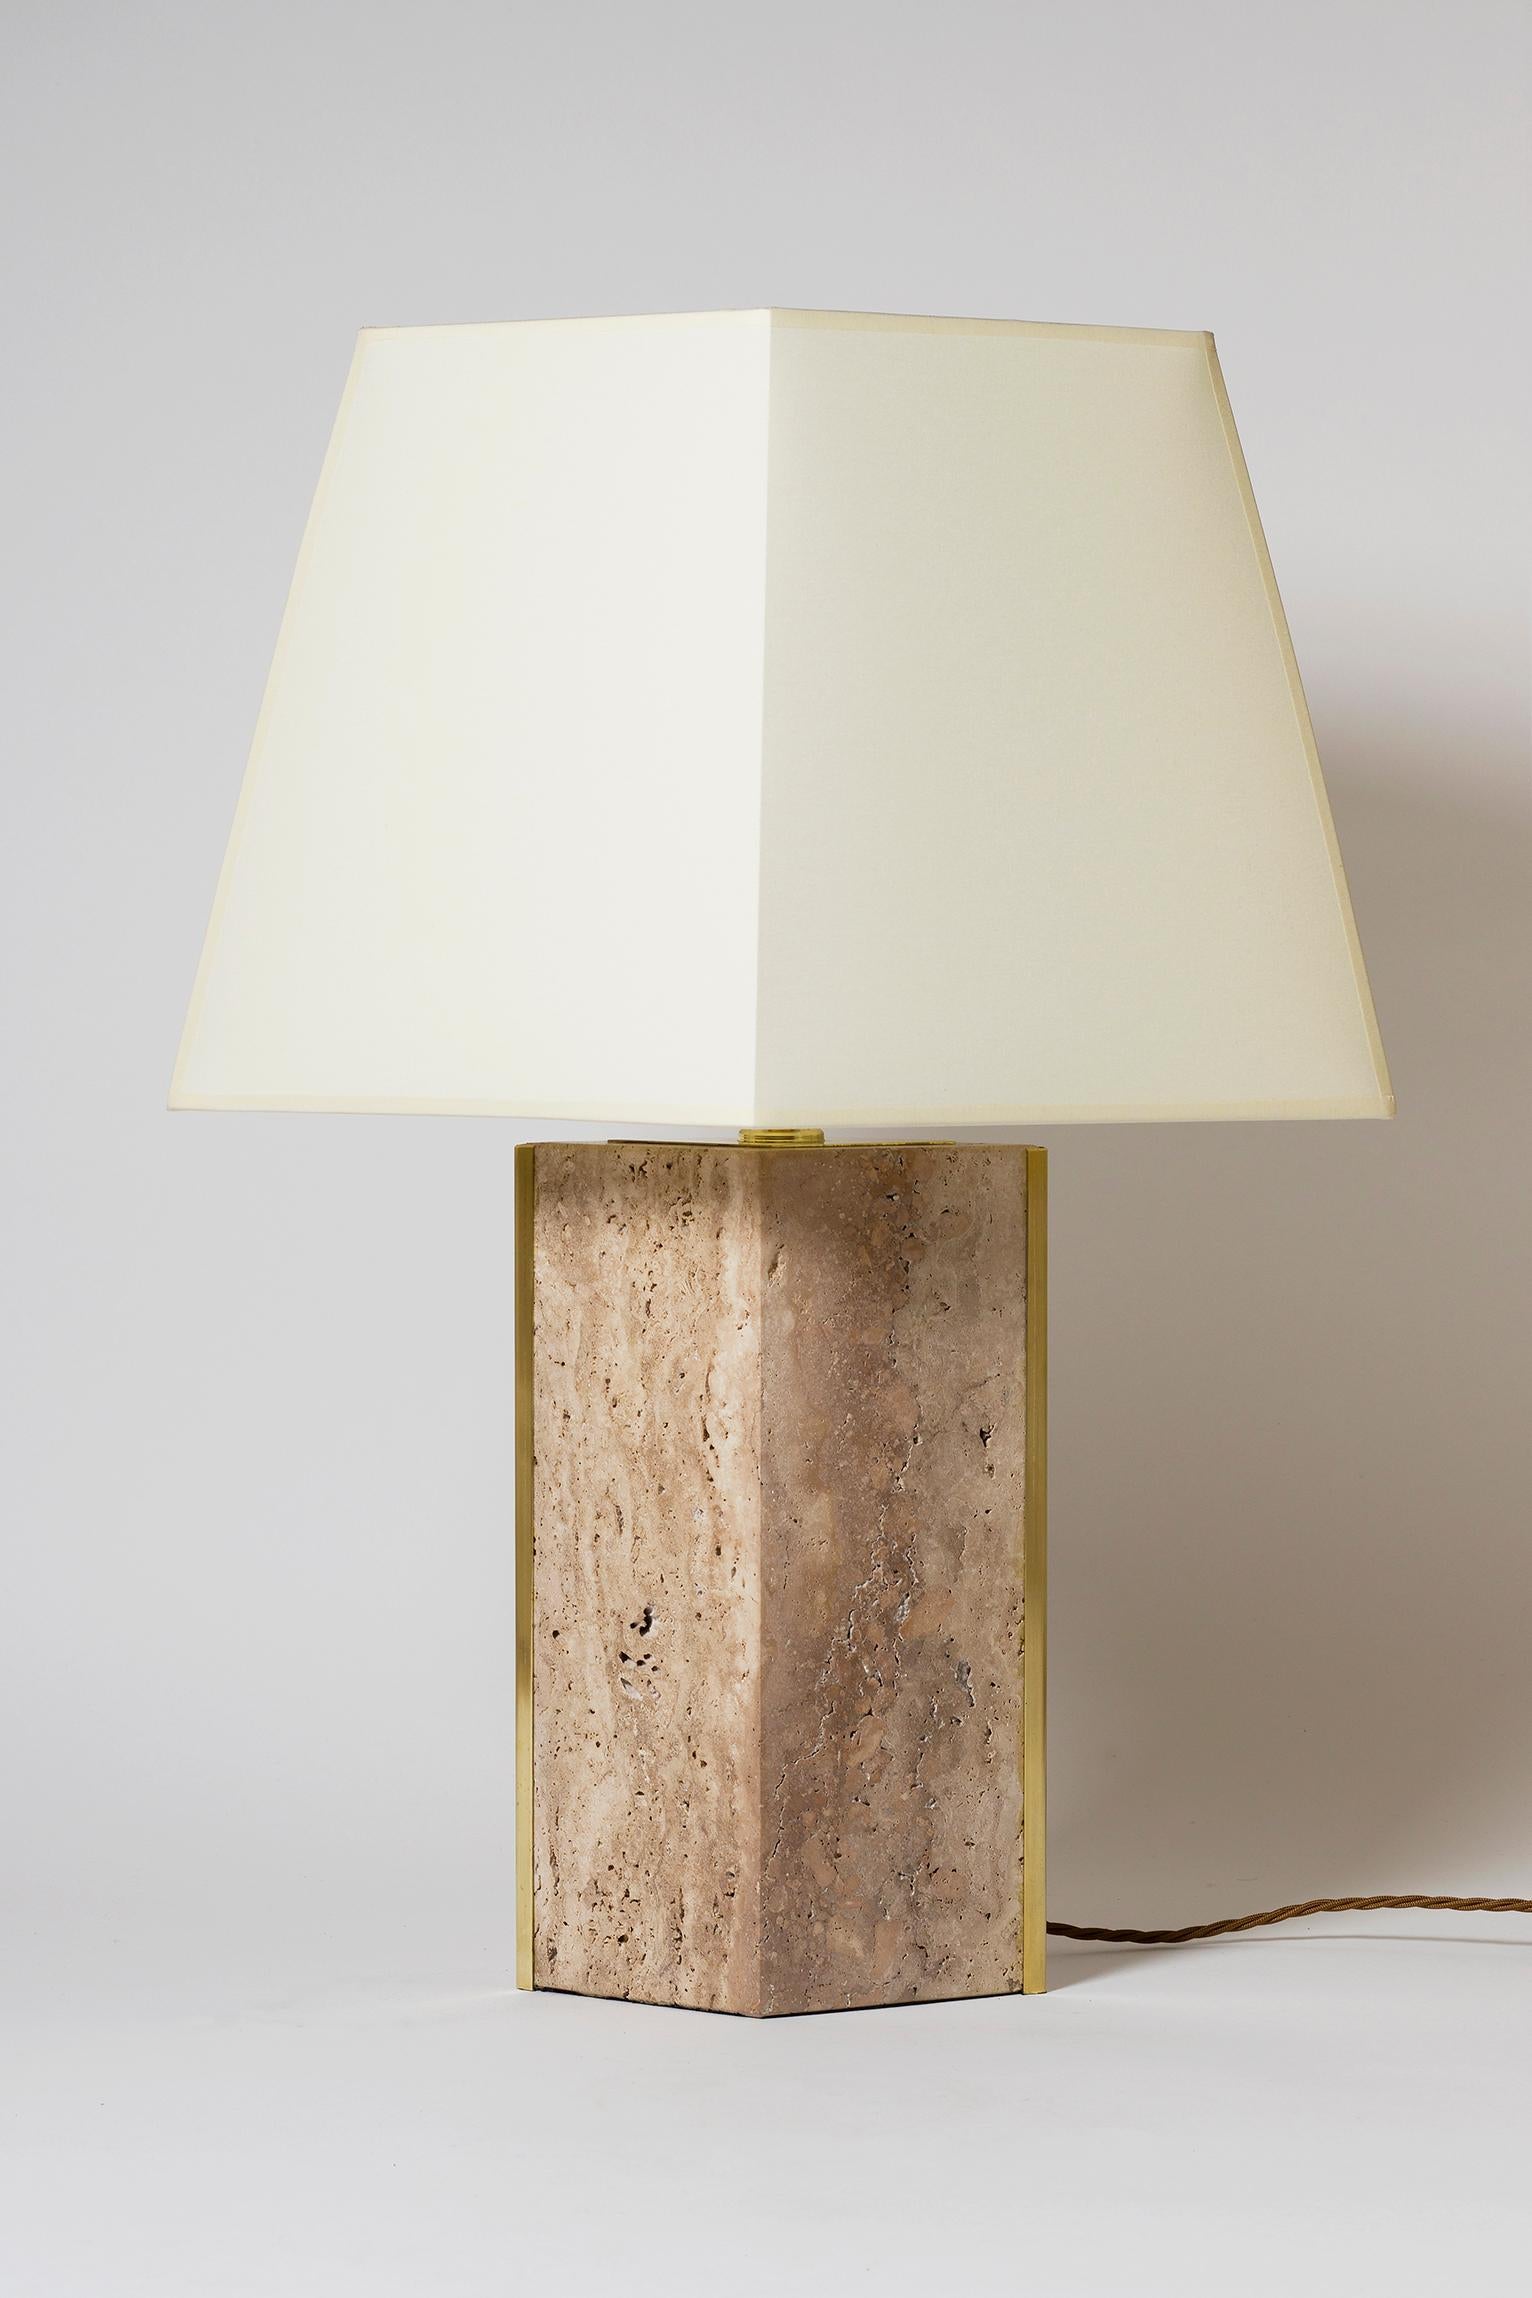 Mid-Century Modern Pair of Travertine and Brass 'Marine' Table Lamps, by Dorian Caffot de Fawes